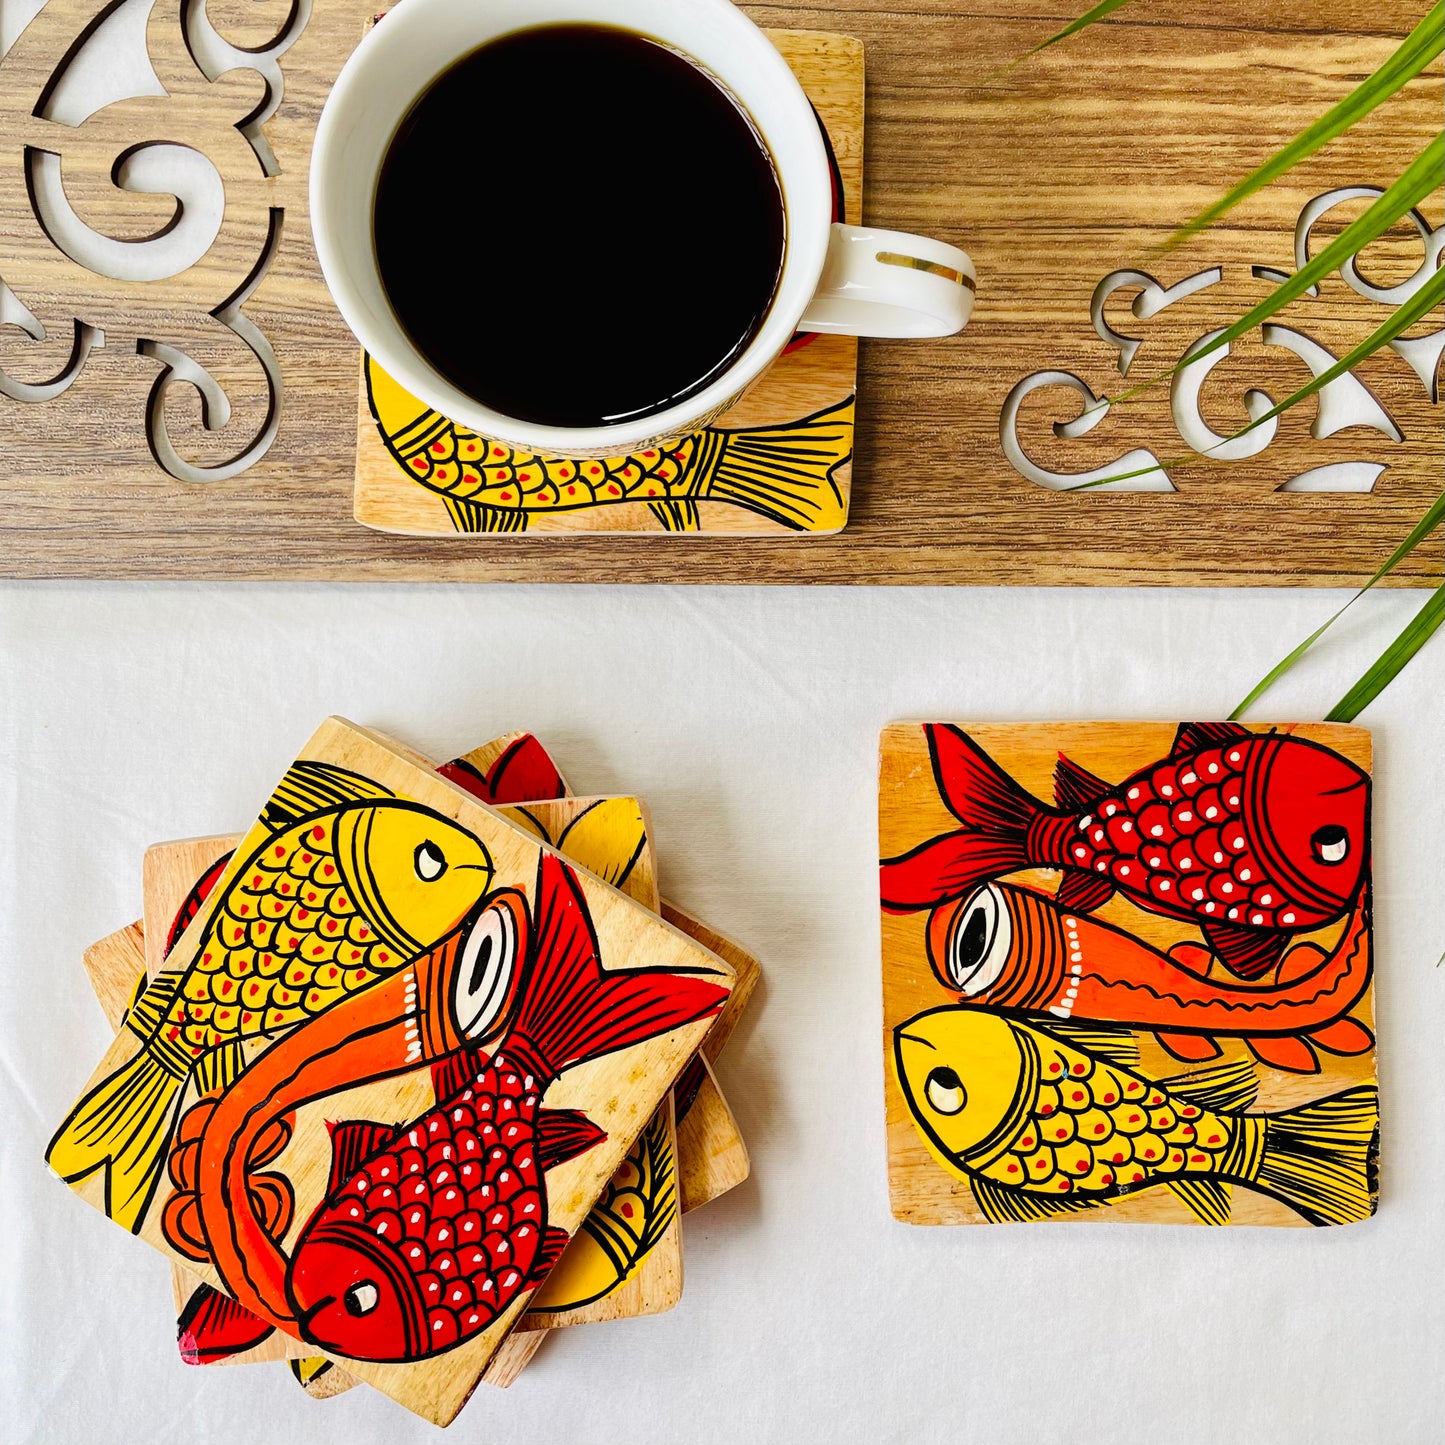 Five pure mango wood square wood coasters painted with one yellow fish and one redfish along with an Indian classical musical instrument in each wood coaster are placed near a teacup on a wood coaster filled with black tea with leaves in the background